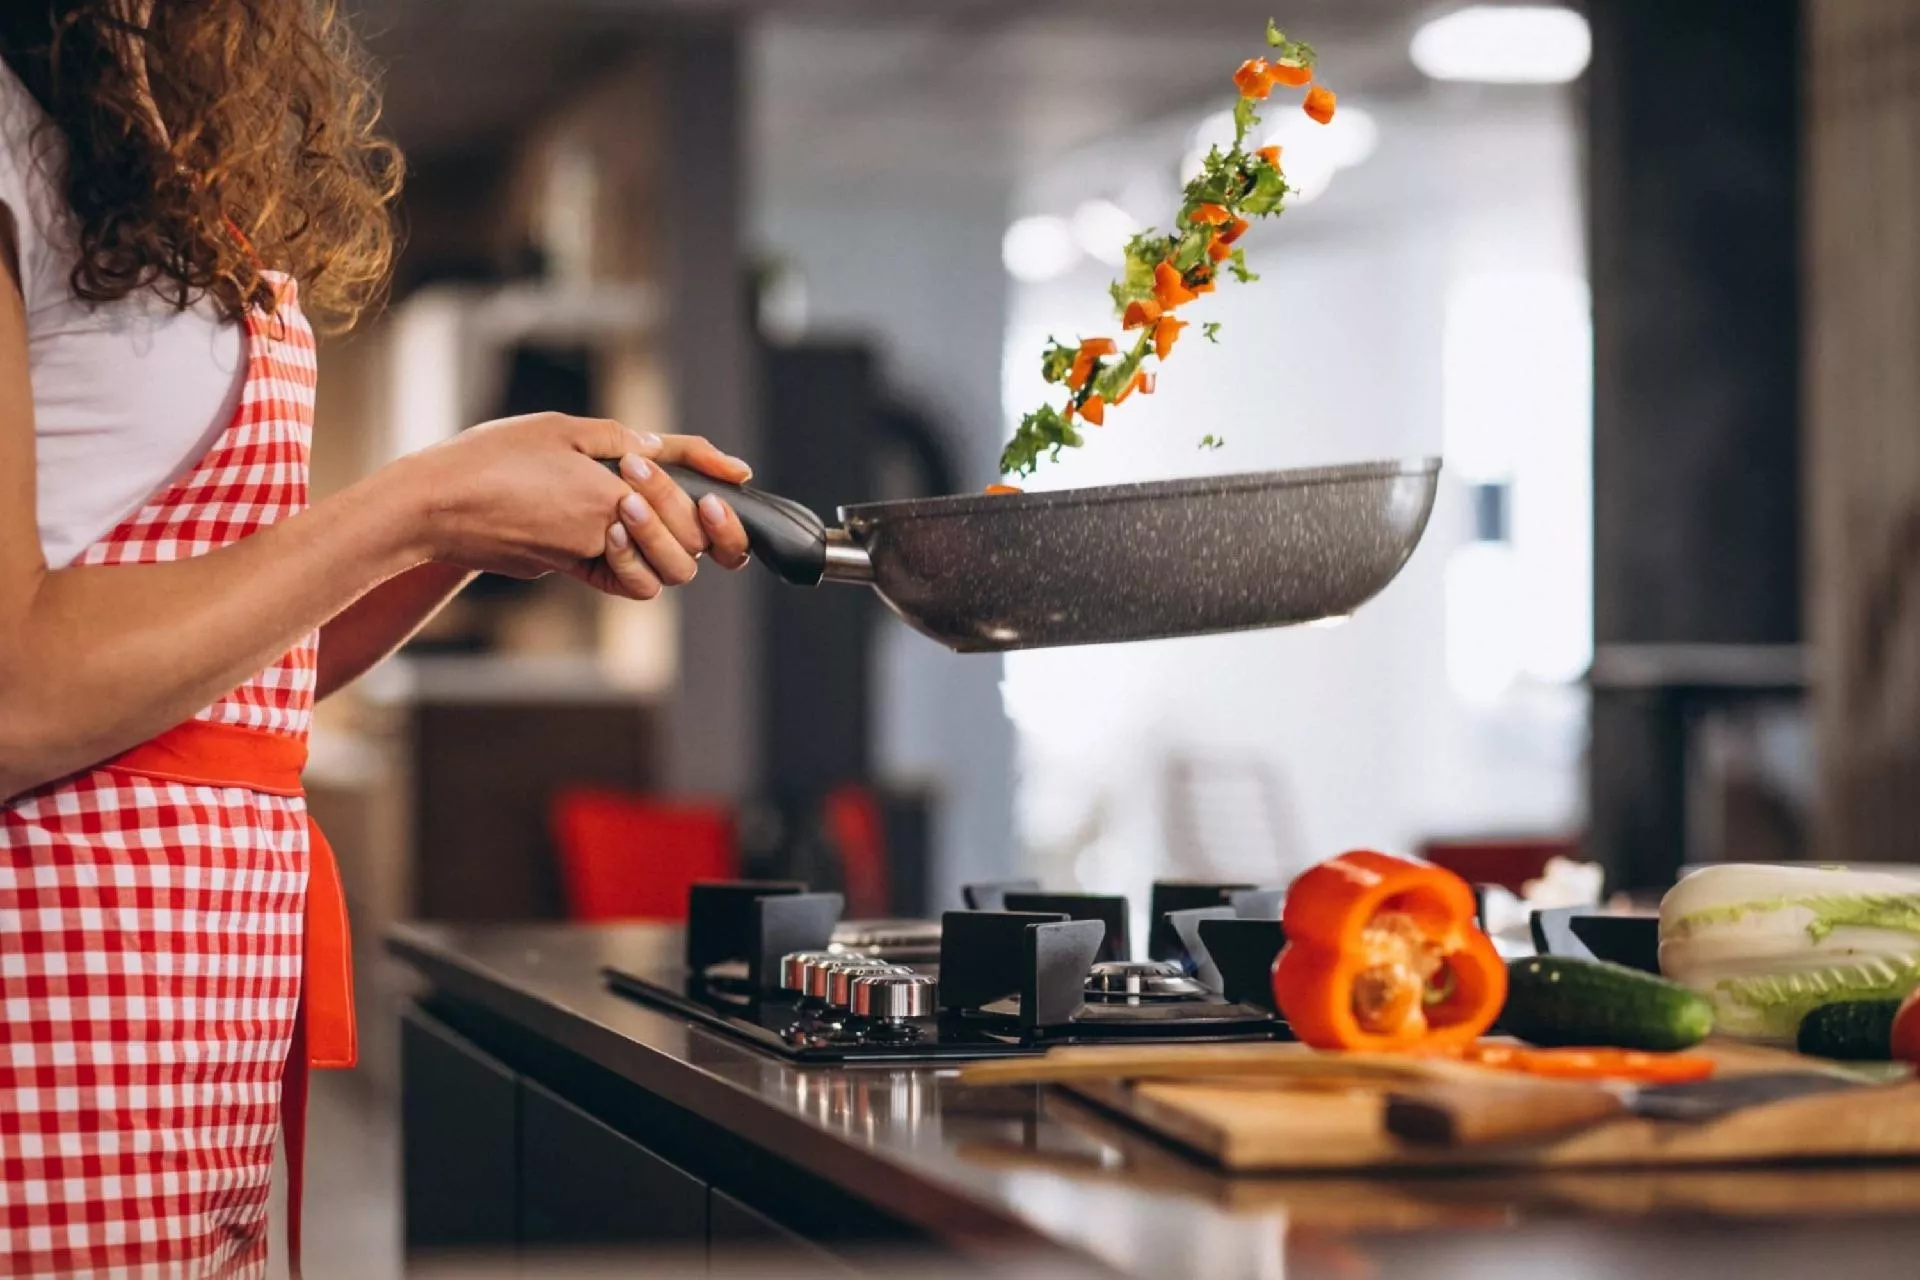 How to Get Started with Healthy Cooking